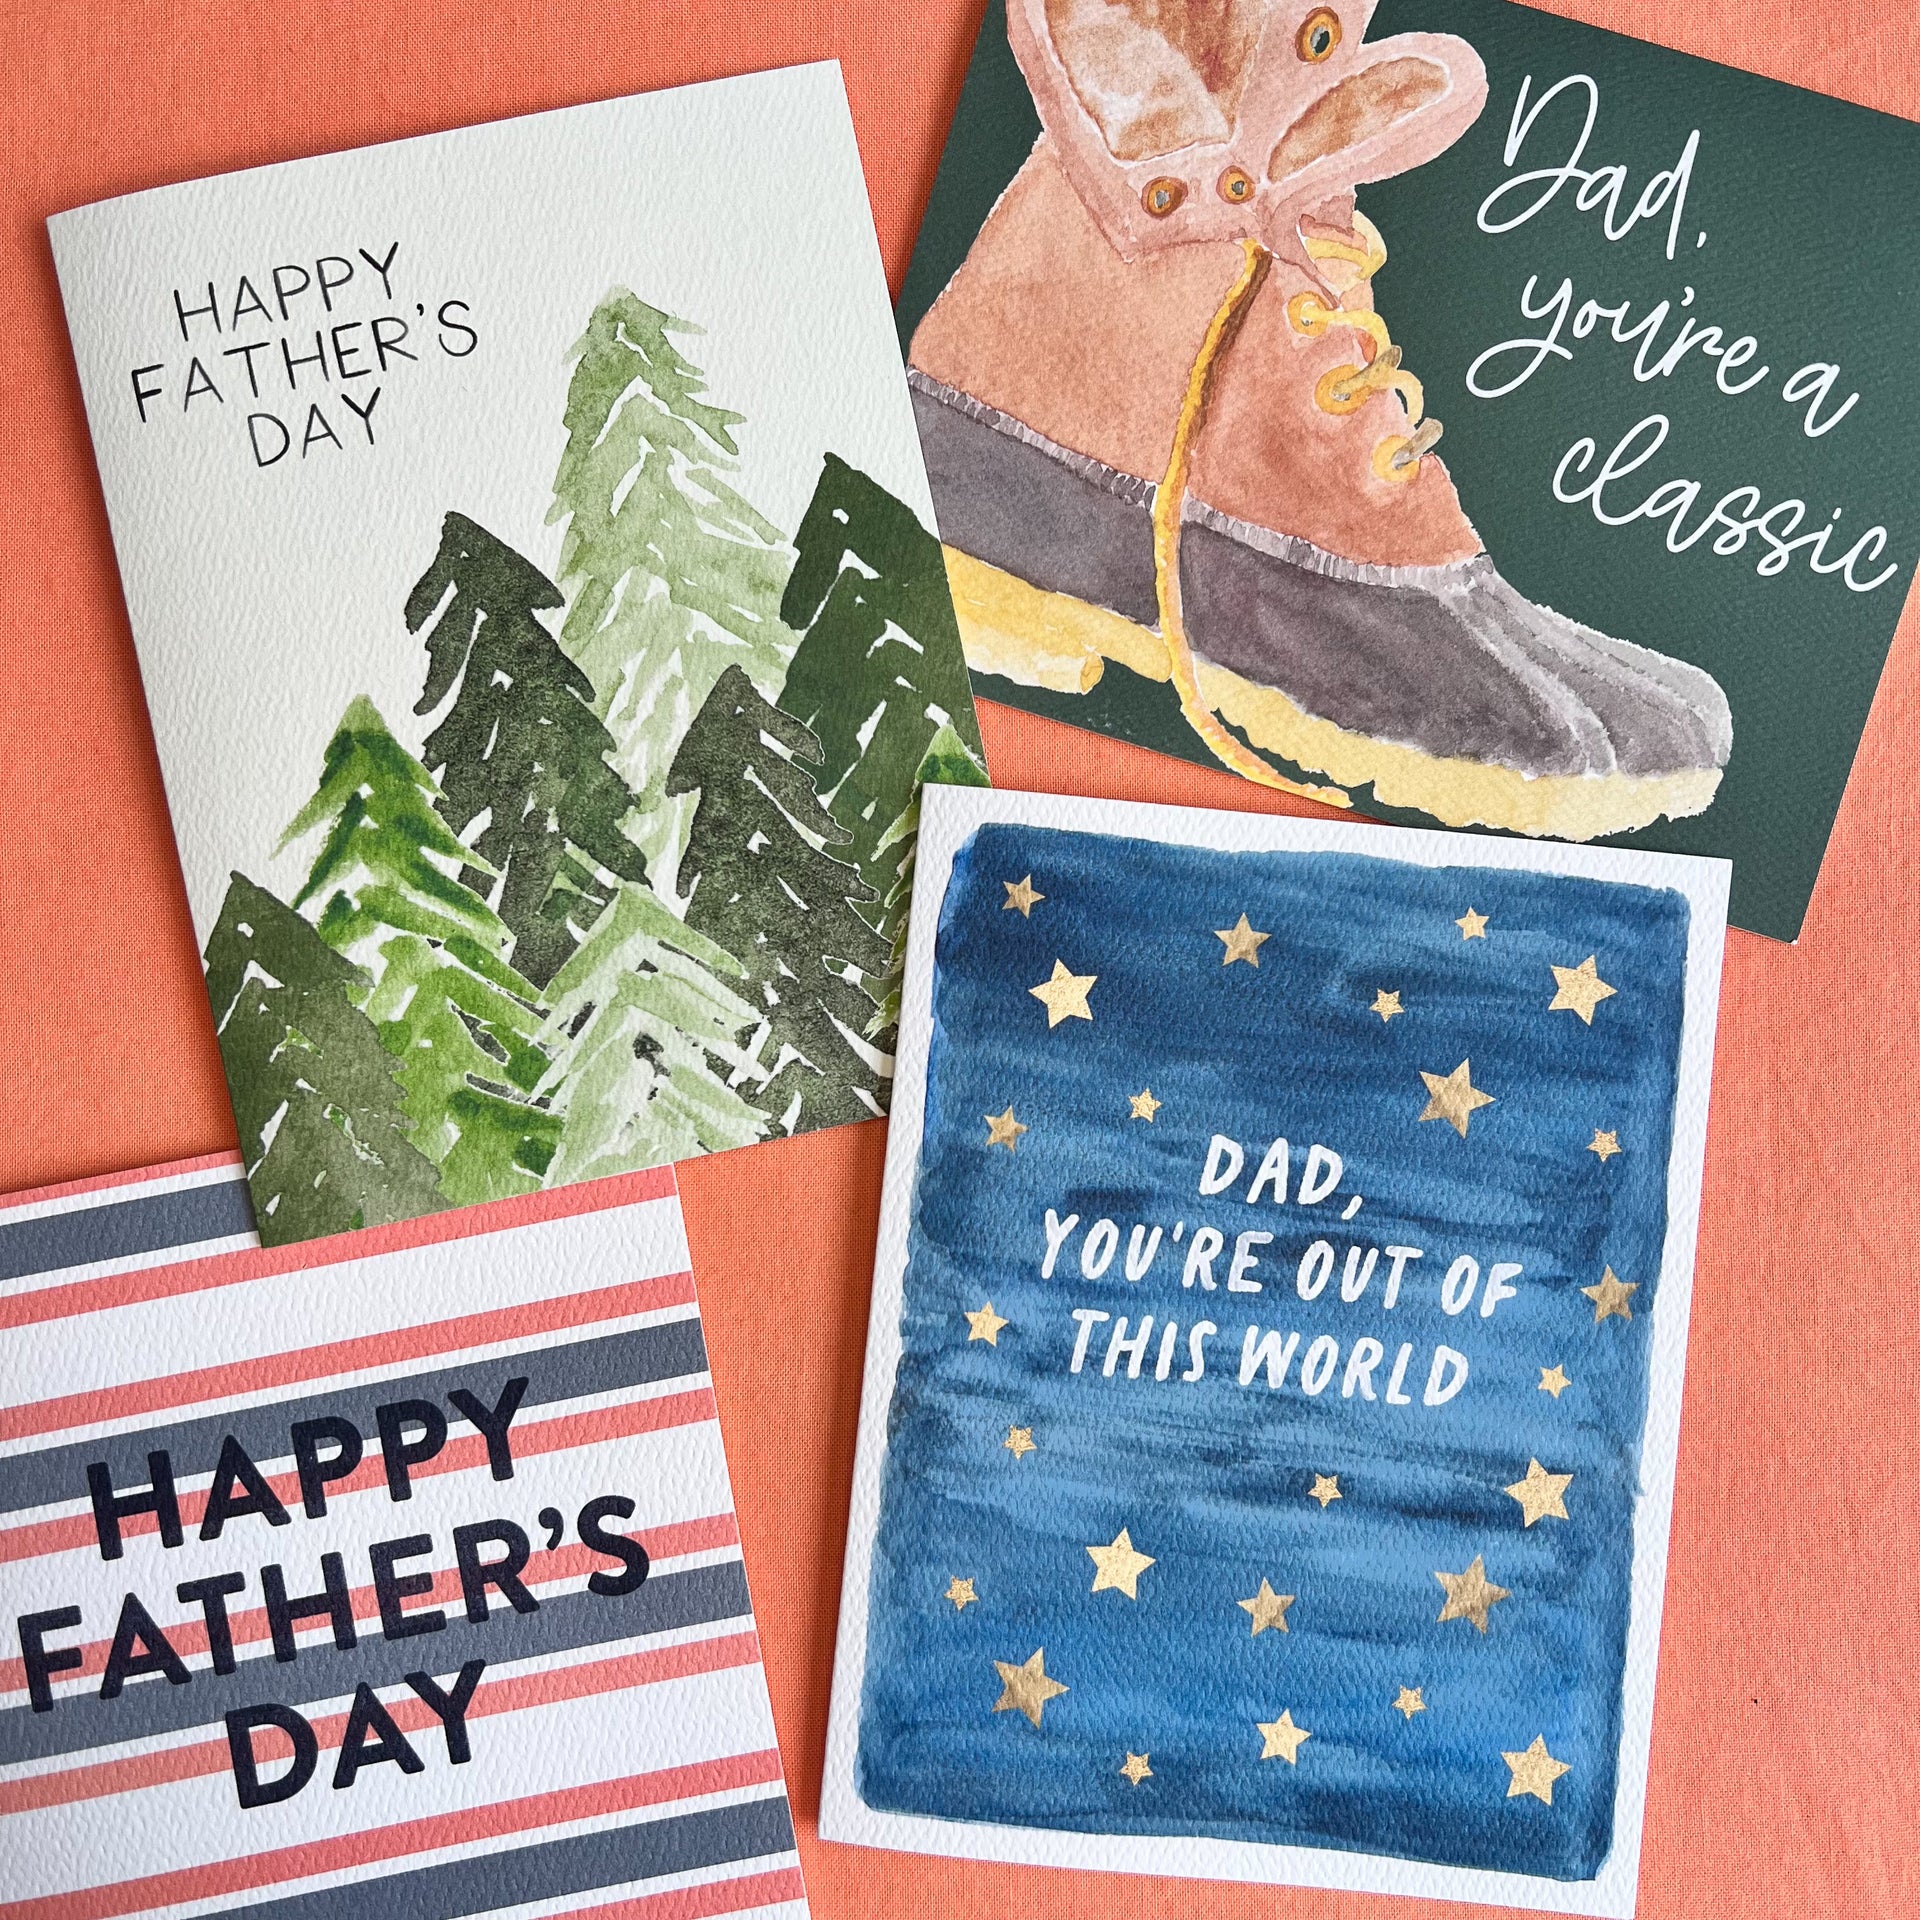 Father's Day Cards by Gert & Co